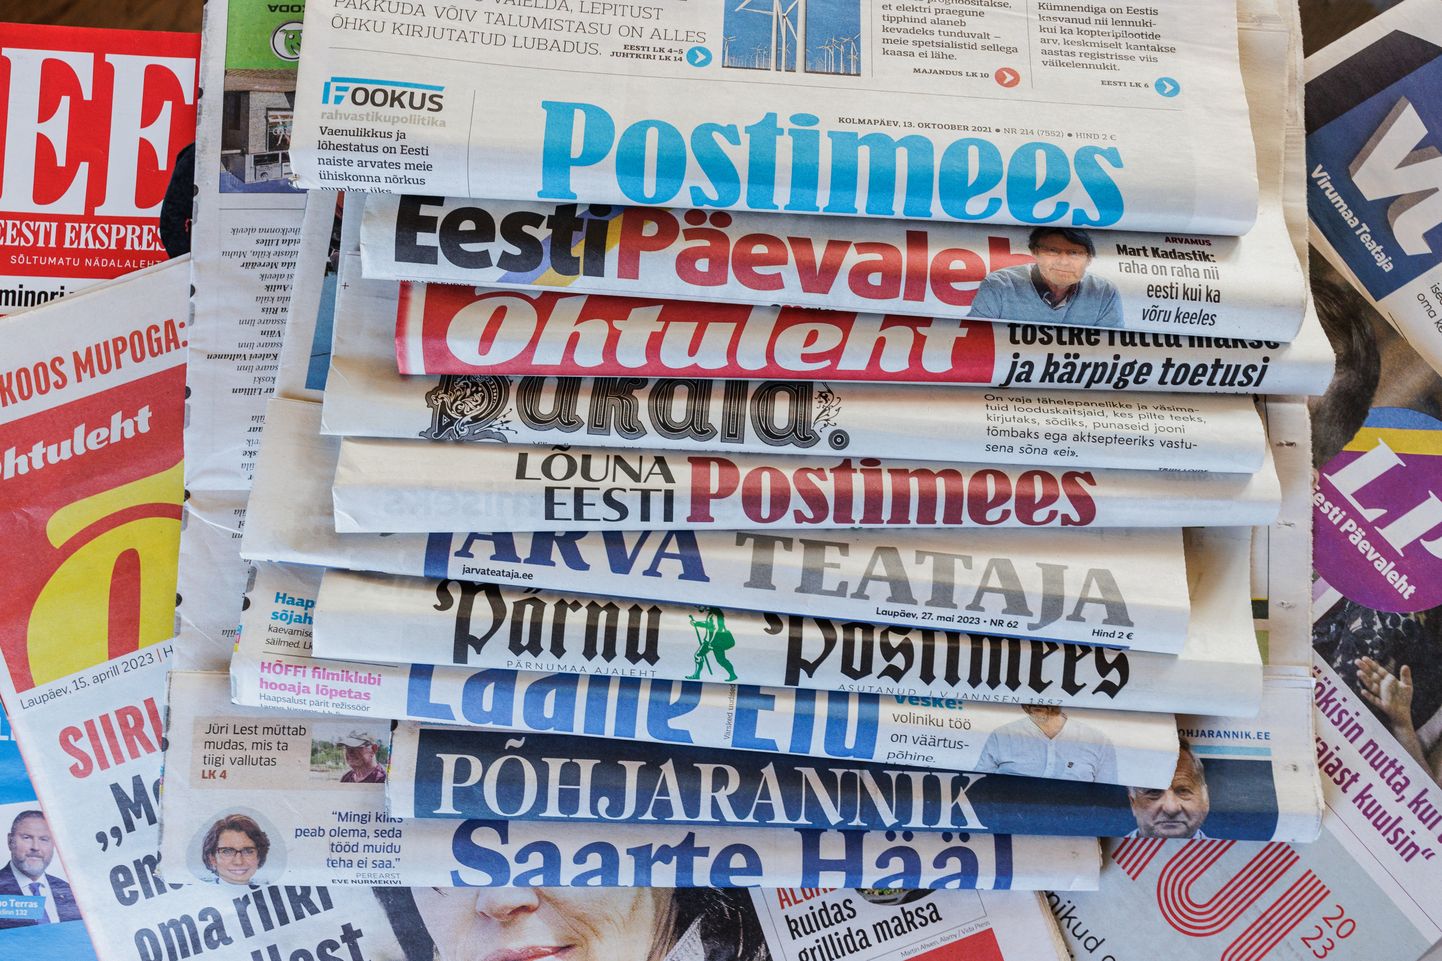 Rumors have reached the Estonian Association of Media Enterprises that the government coalition decided on Thursday afternoon to raise the VAT rate on newspaper subscriptions by 4 percentage points